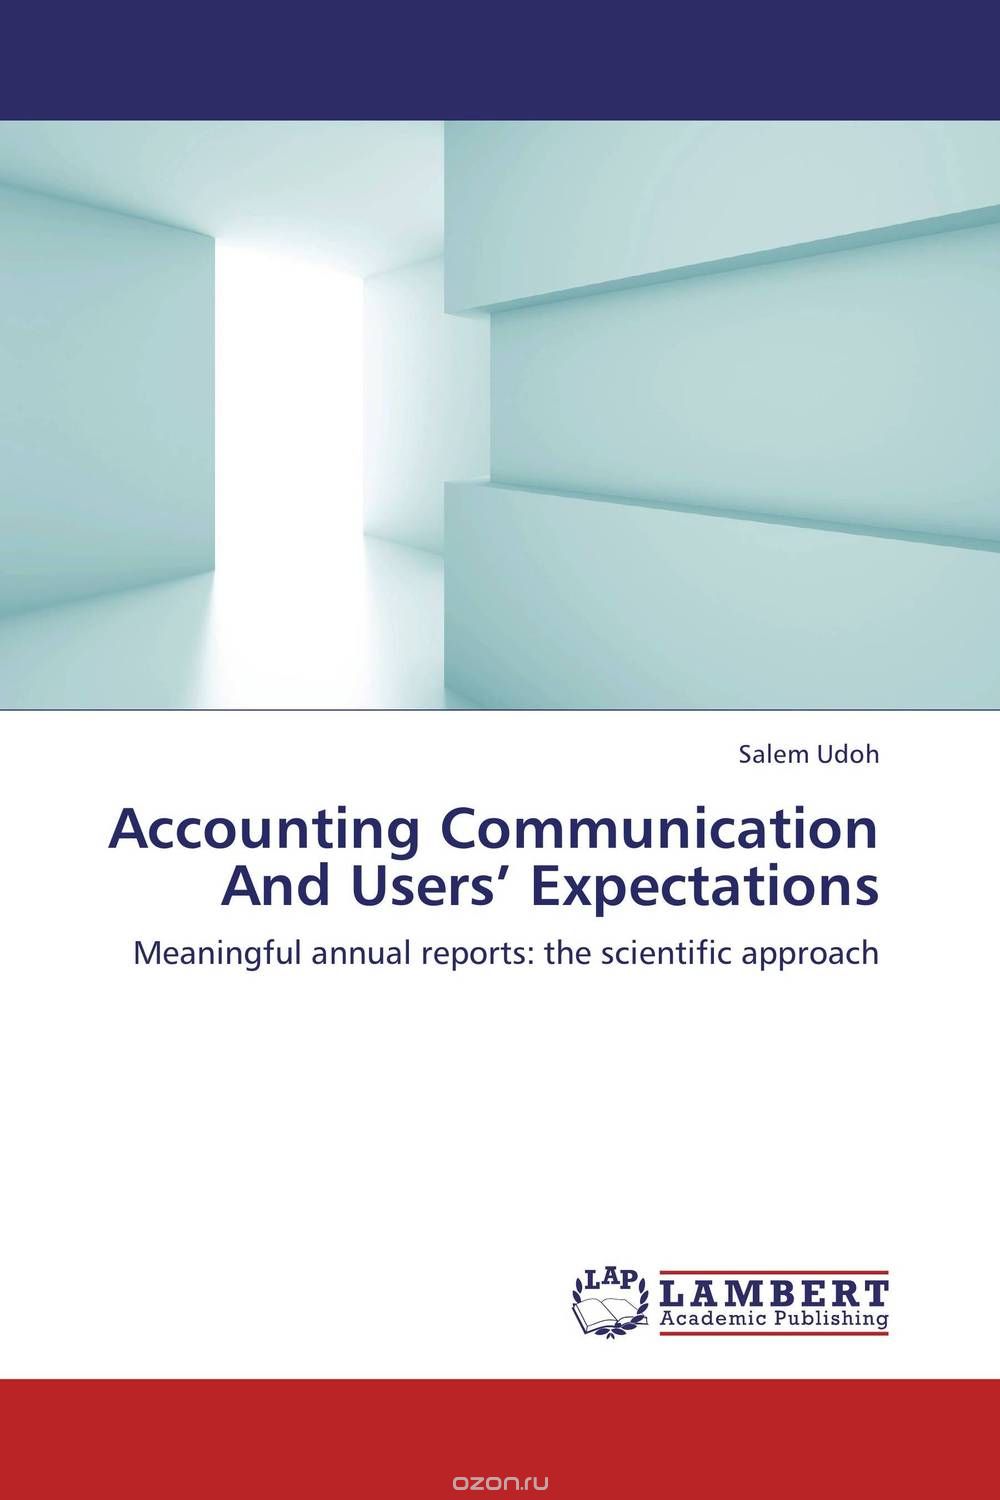 Accounting Communication And Users’ Expectations